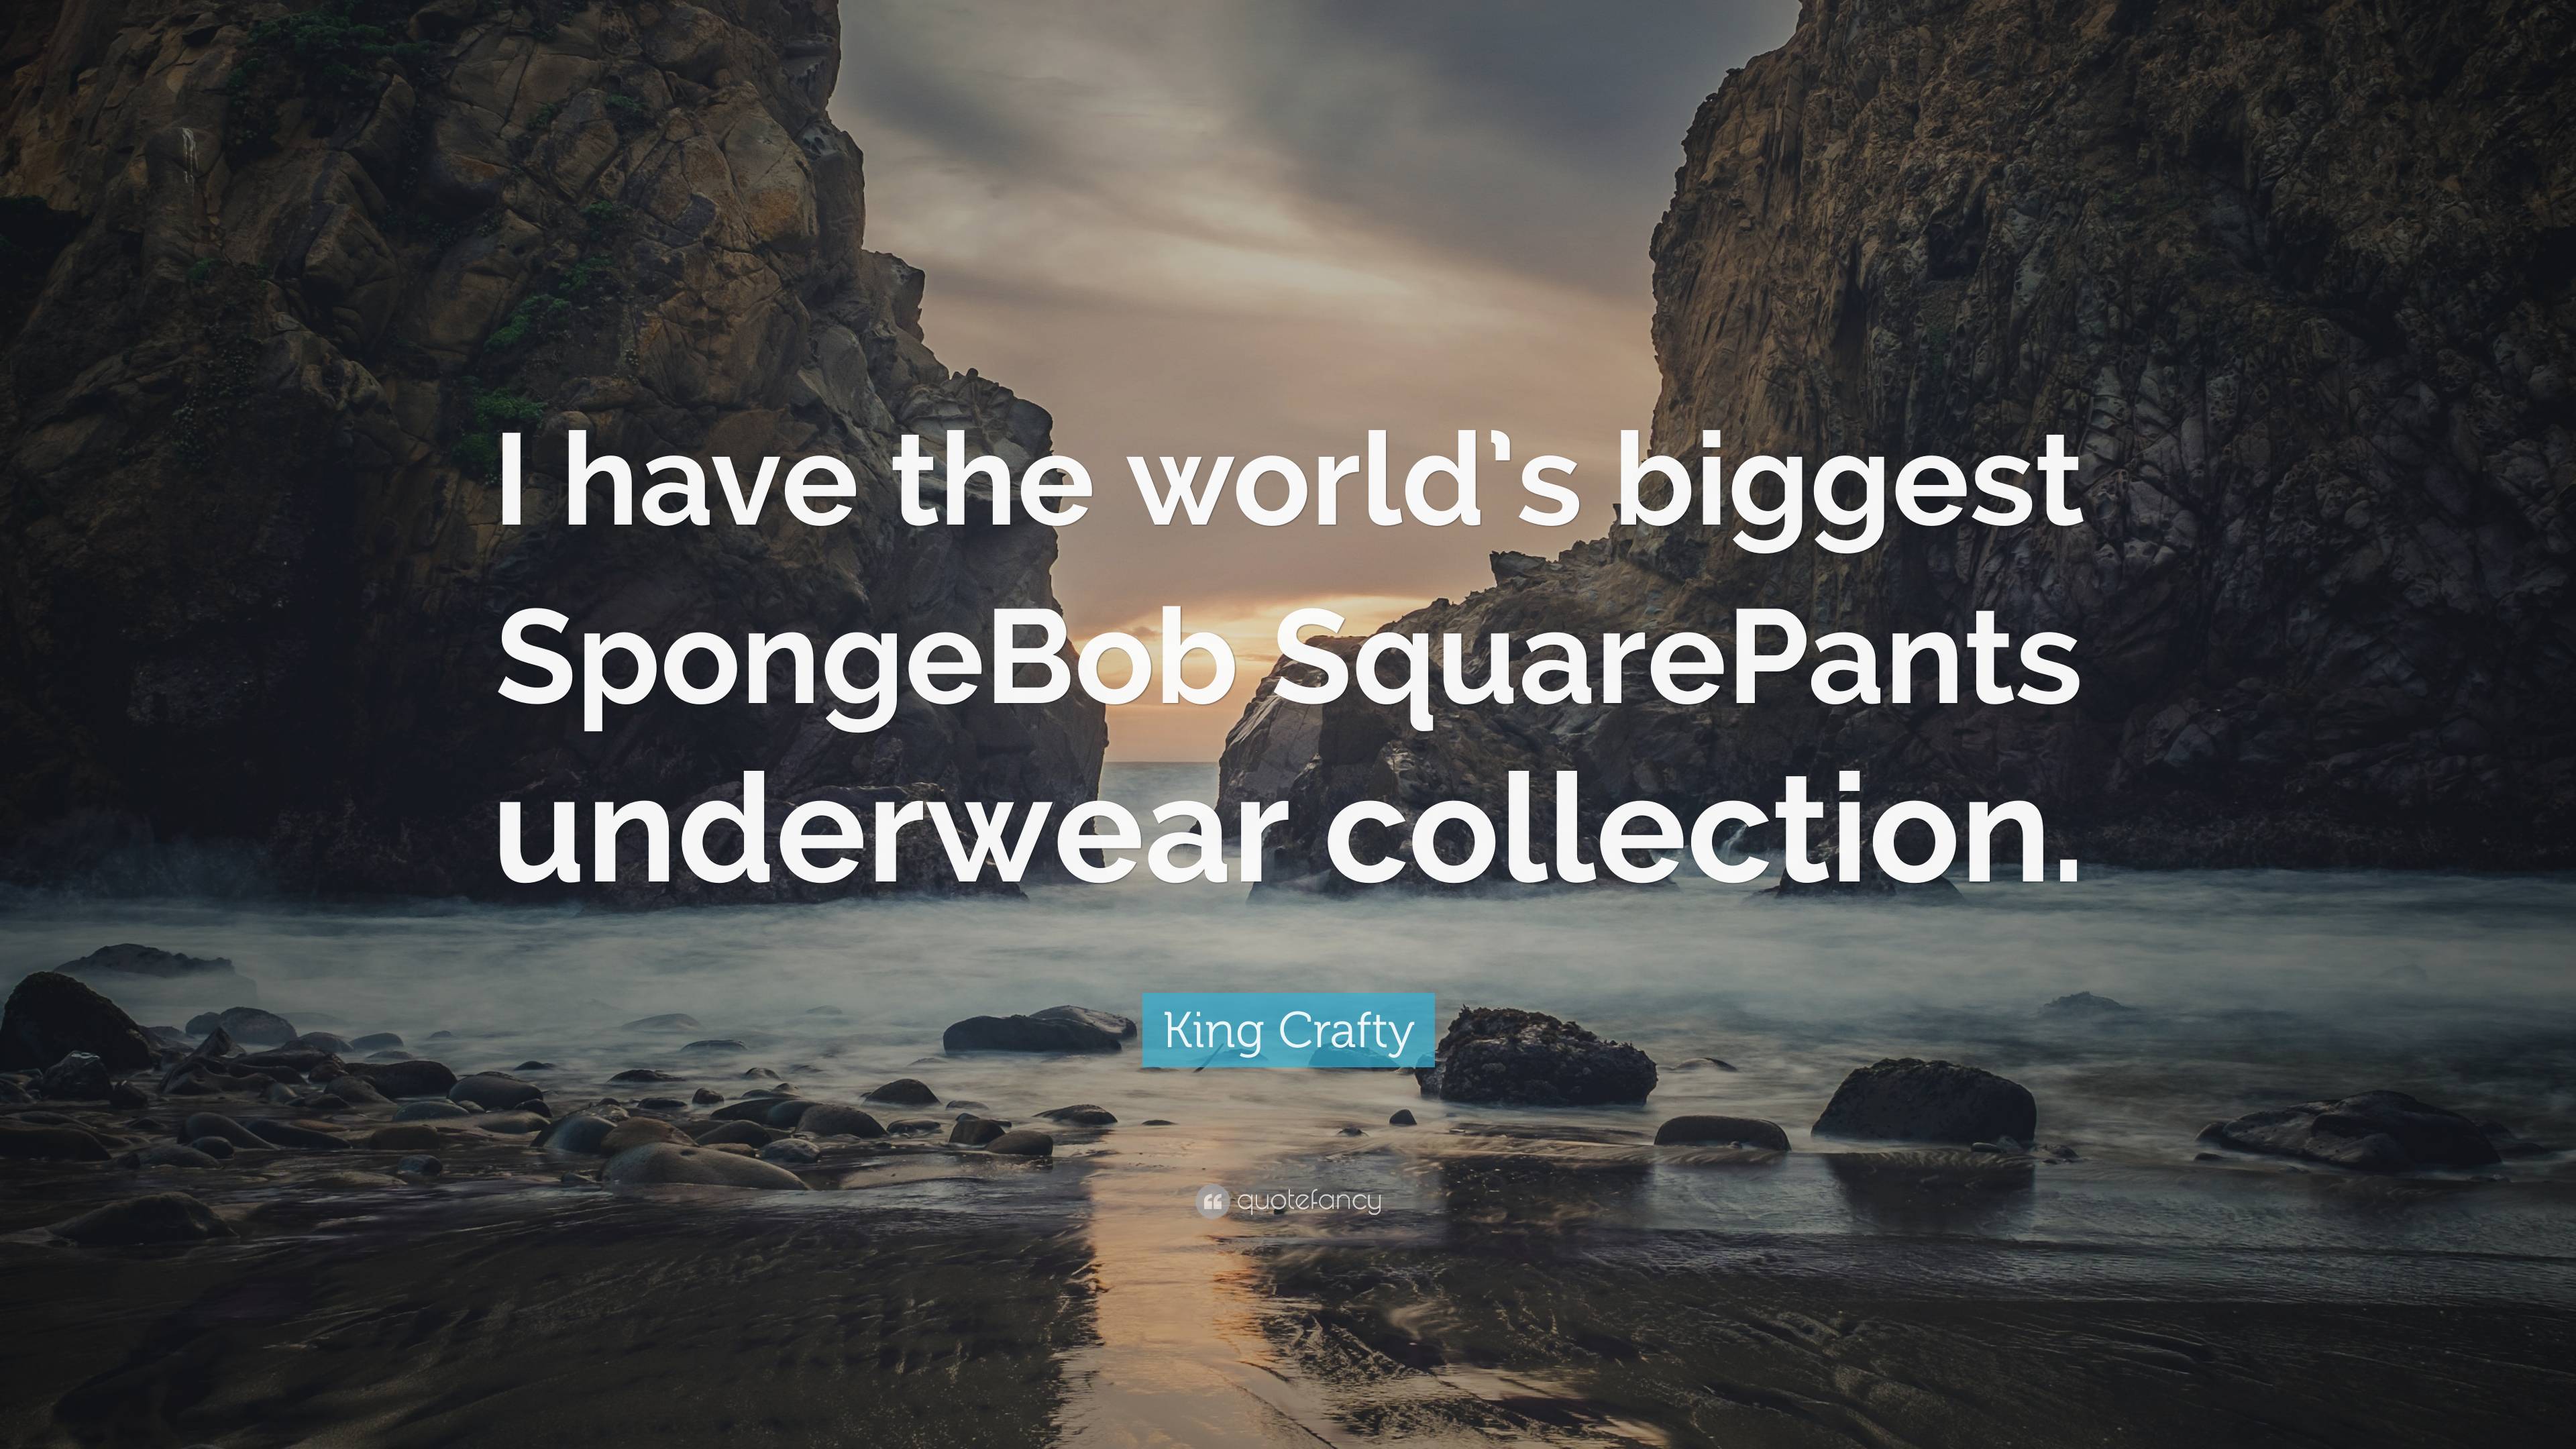 King Crafty Quote: “I have the world's biggest SpongeBob